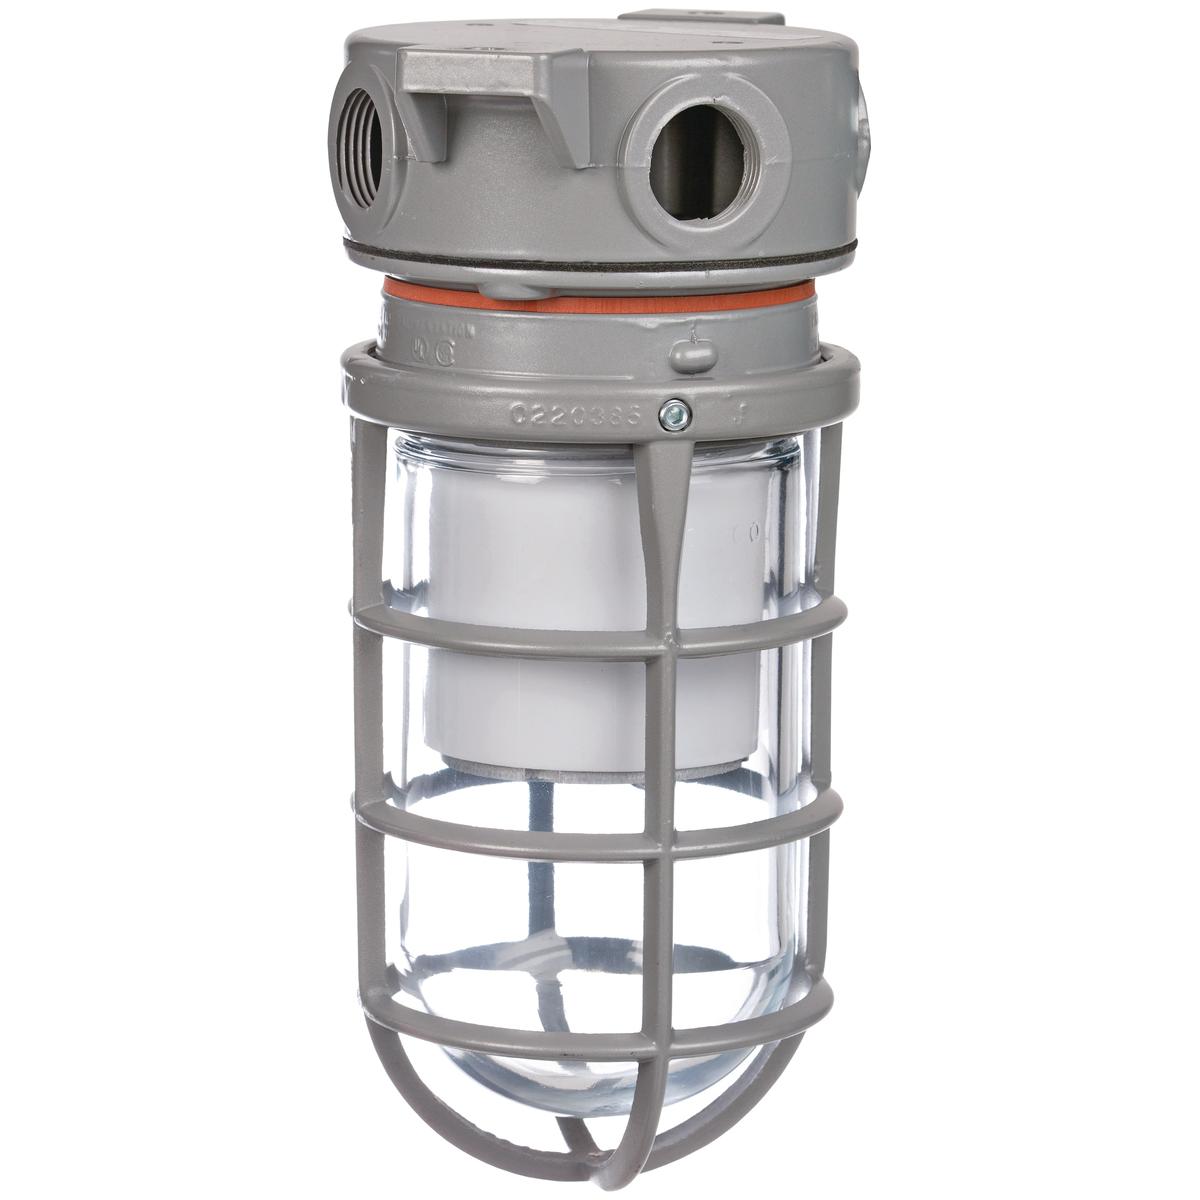 Hubbell VSL1330F1SG The VSL Series is a Vapor Tight/ Utility fixture using energy efficient LED's. This fixture is made with a cast copper-free aluminum housing and mount that is  suitable for harsh and hazardous environments. With the design of this fixtures internal heat s